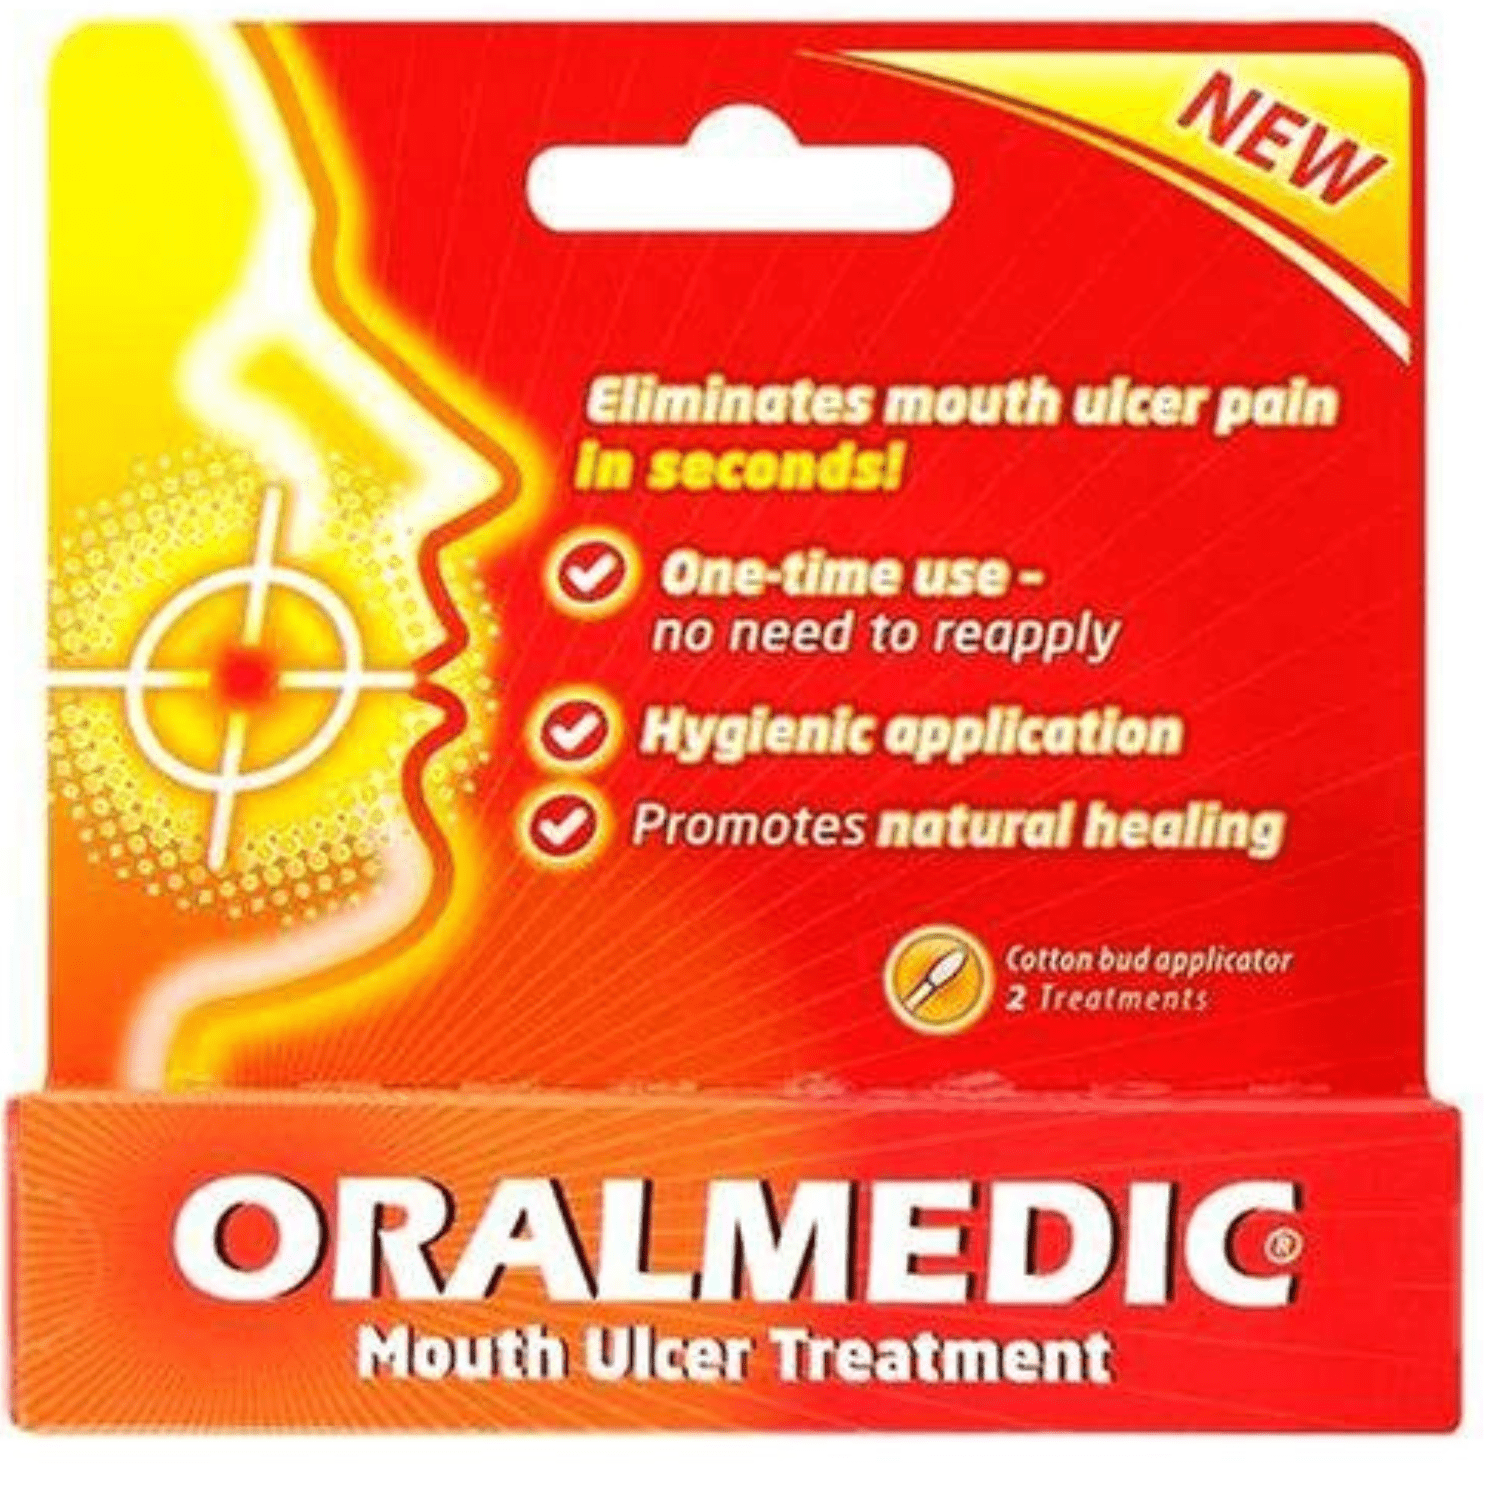 Oralmedic Gel Mouth Ulcer And Canker Sore Treatment Instant Pain